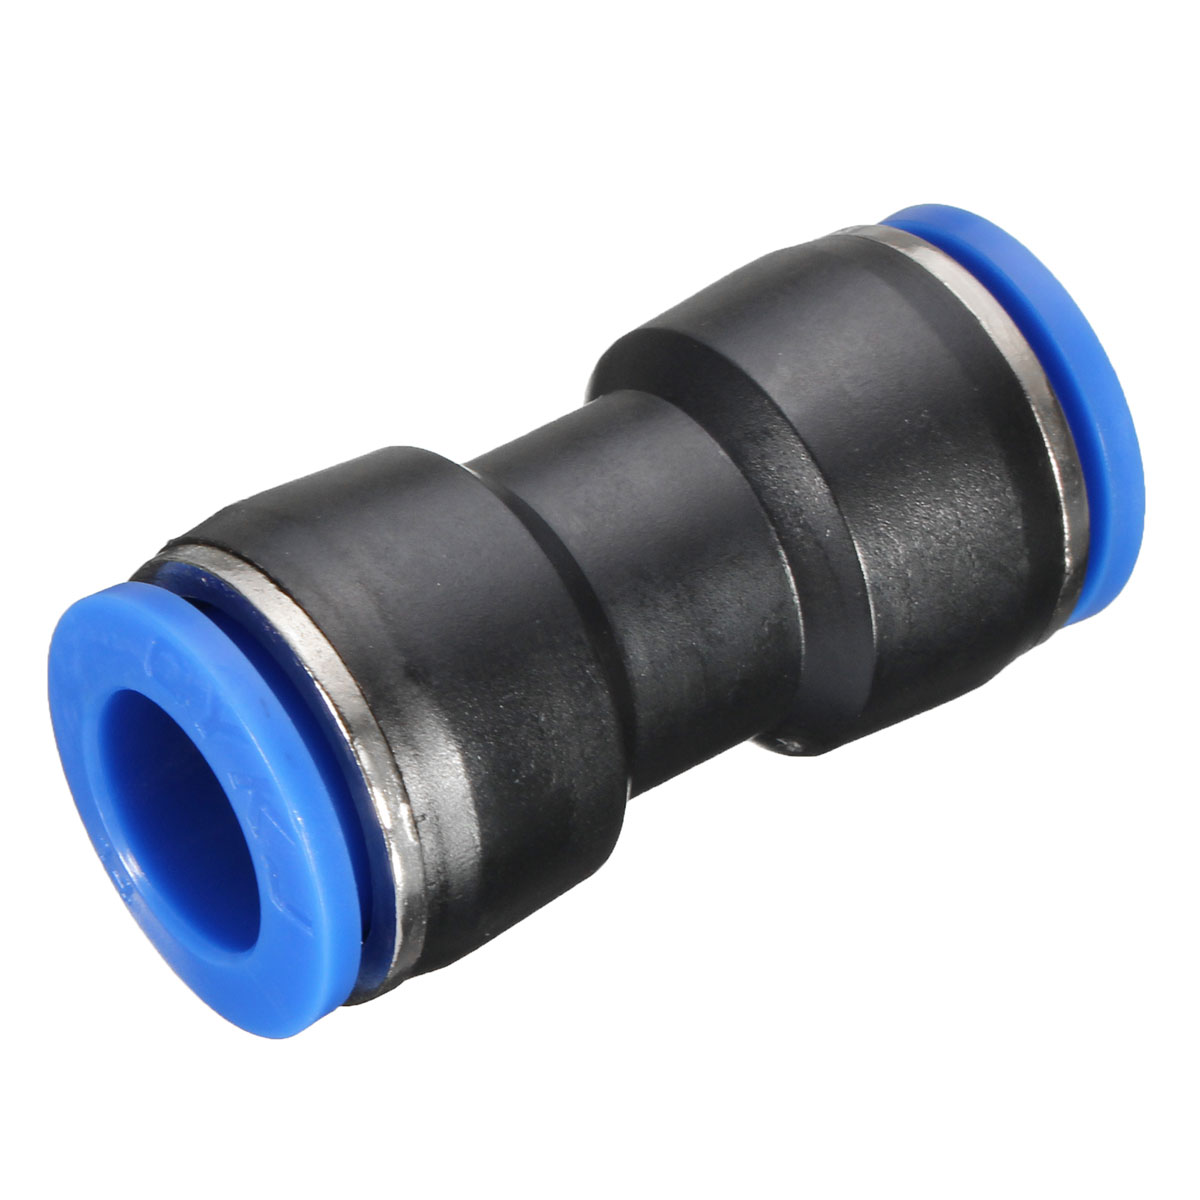 Pneumatic-Push-In-Fittings-For-Air-Water-Hose-Pipe-Connectors-Tube-Connector-1030560-5